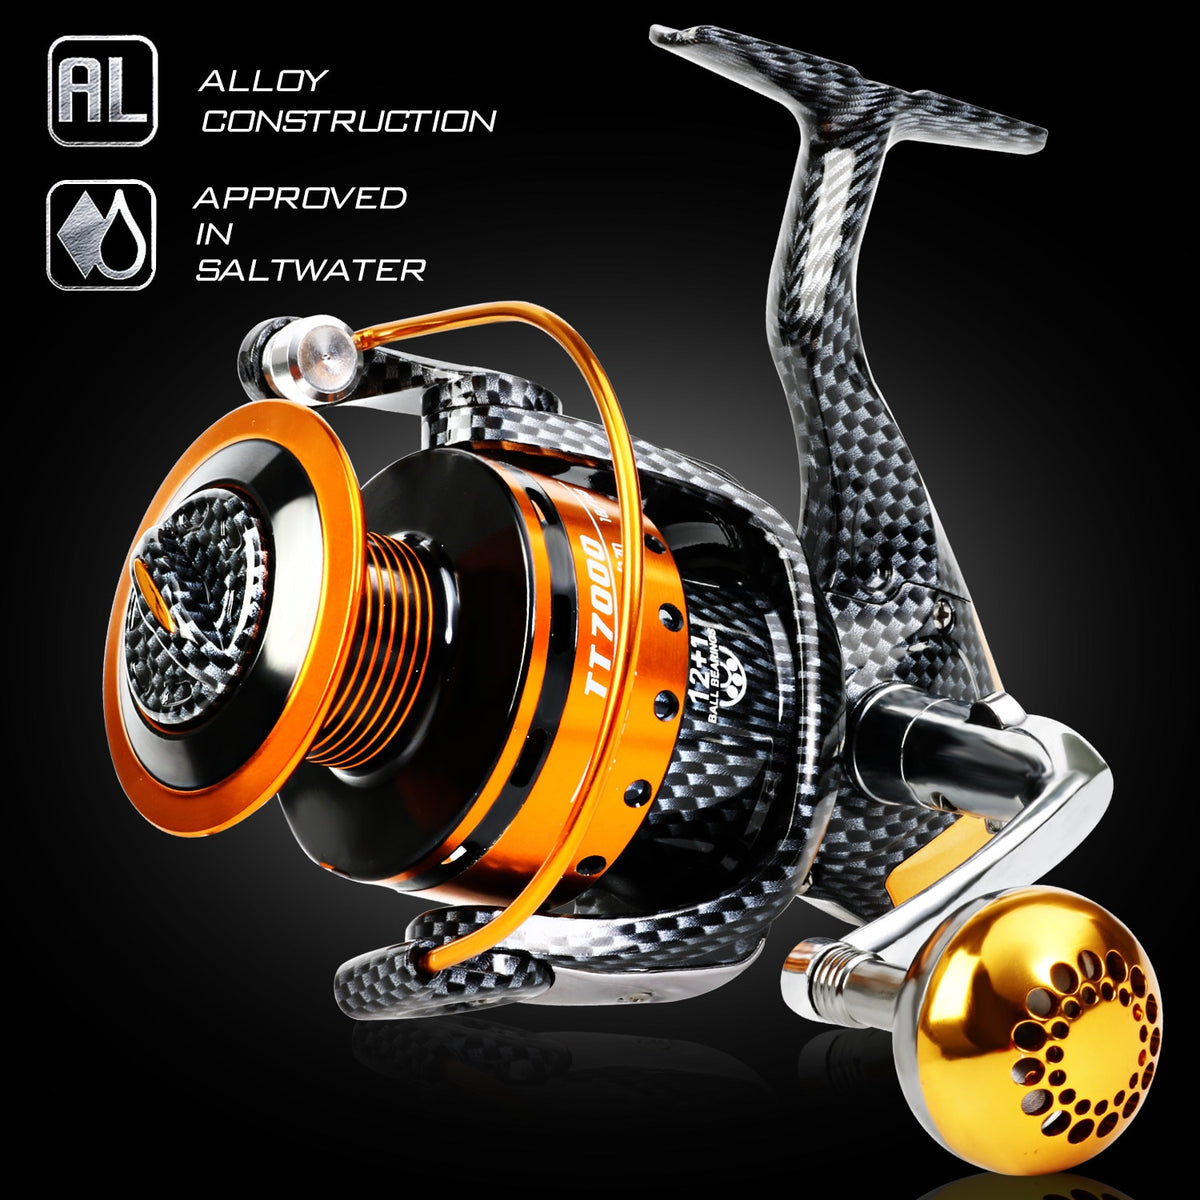 Spinning Reels For Freshwater Fishing, 1000